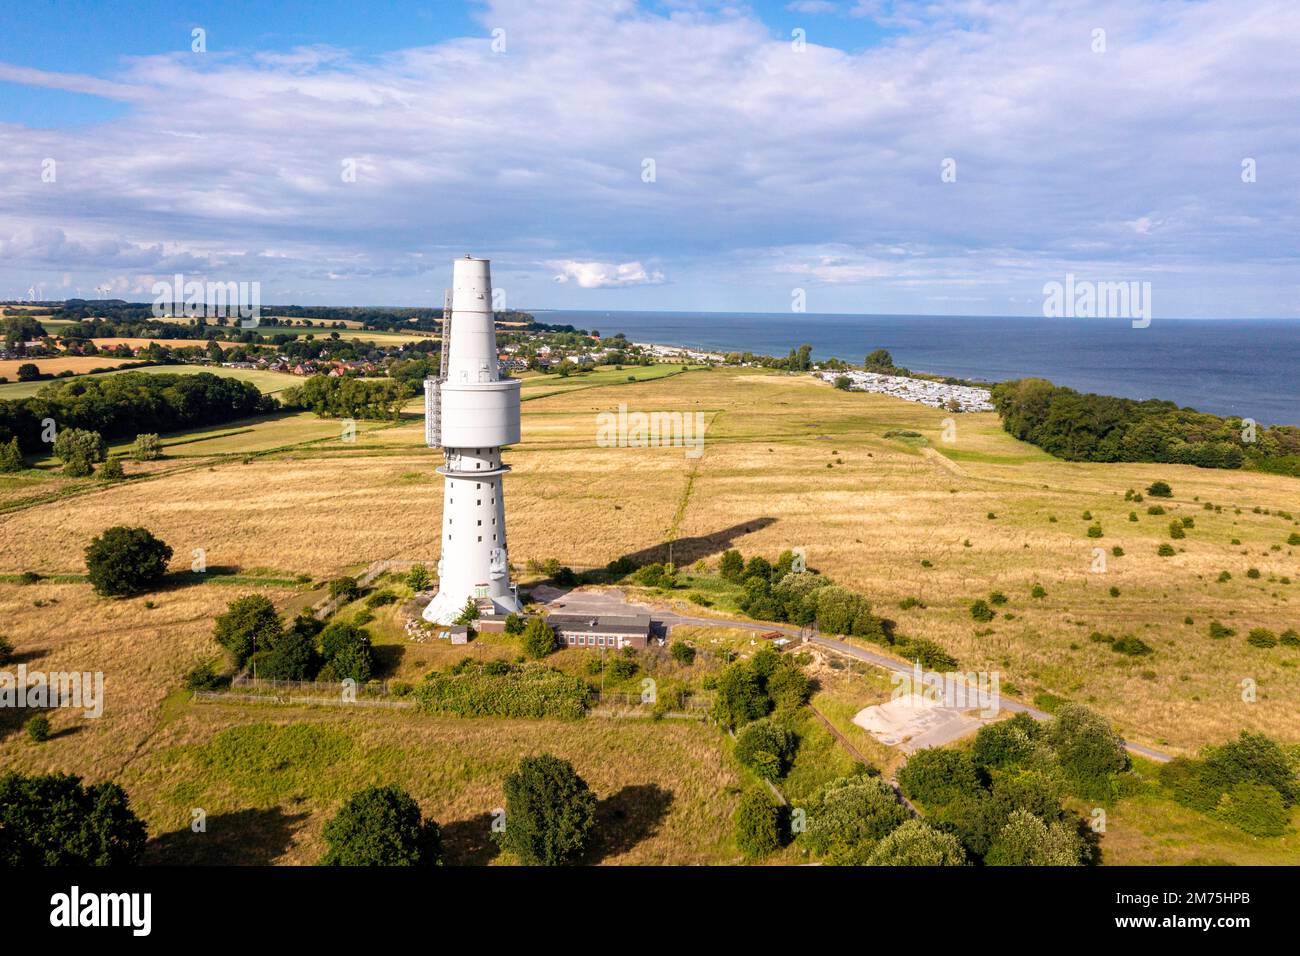 Drone photo, drone shot, listening tower near Pelzerhaken, old telecommunications tower, view of the Baltic Sea coast, camping site near Rettin Stock Photo